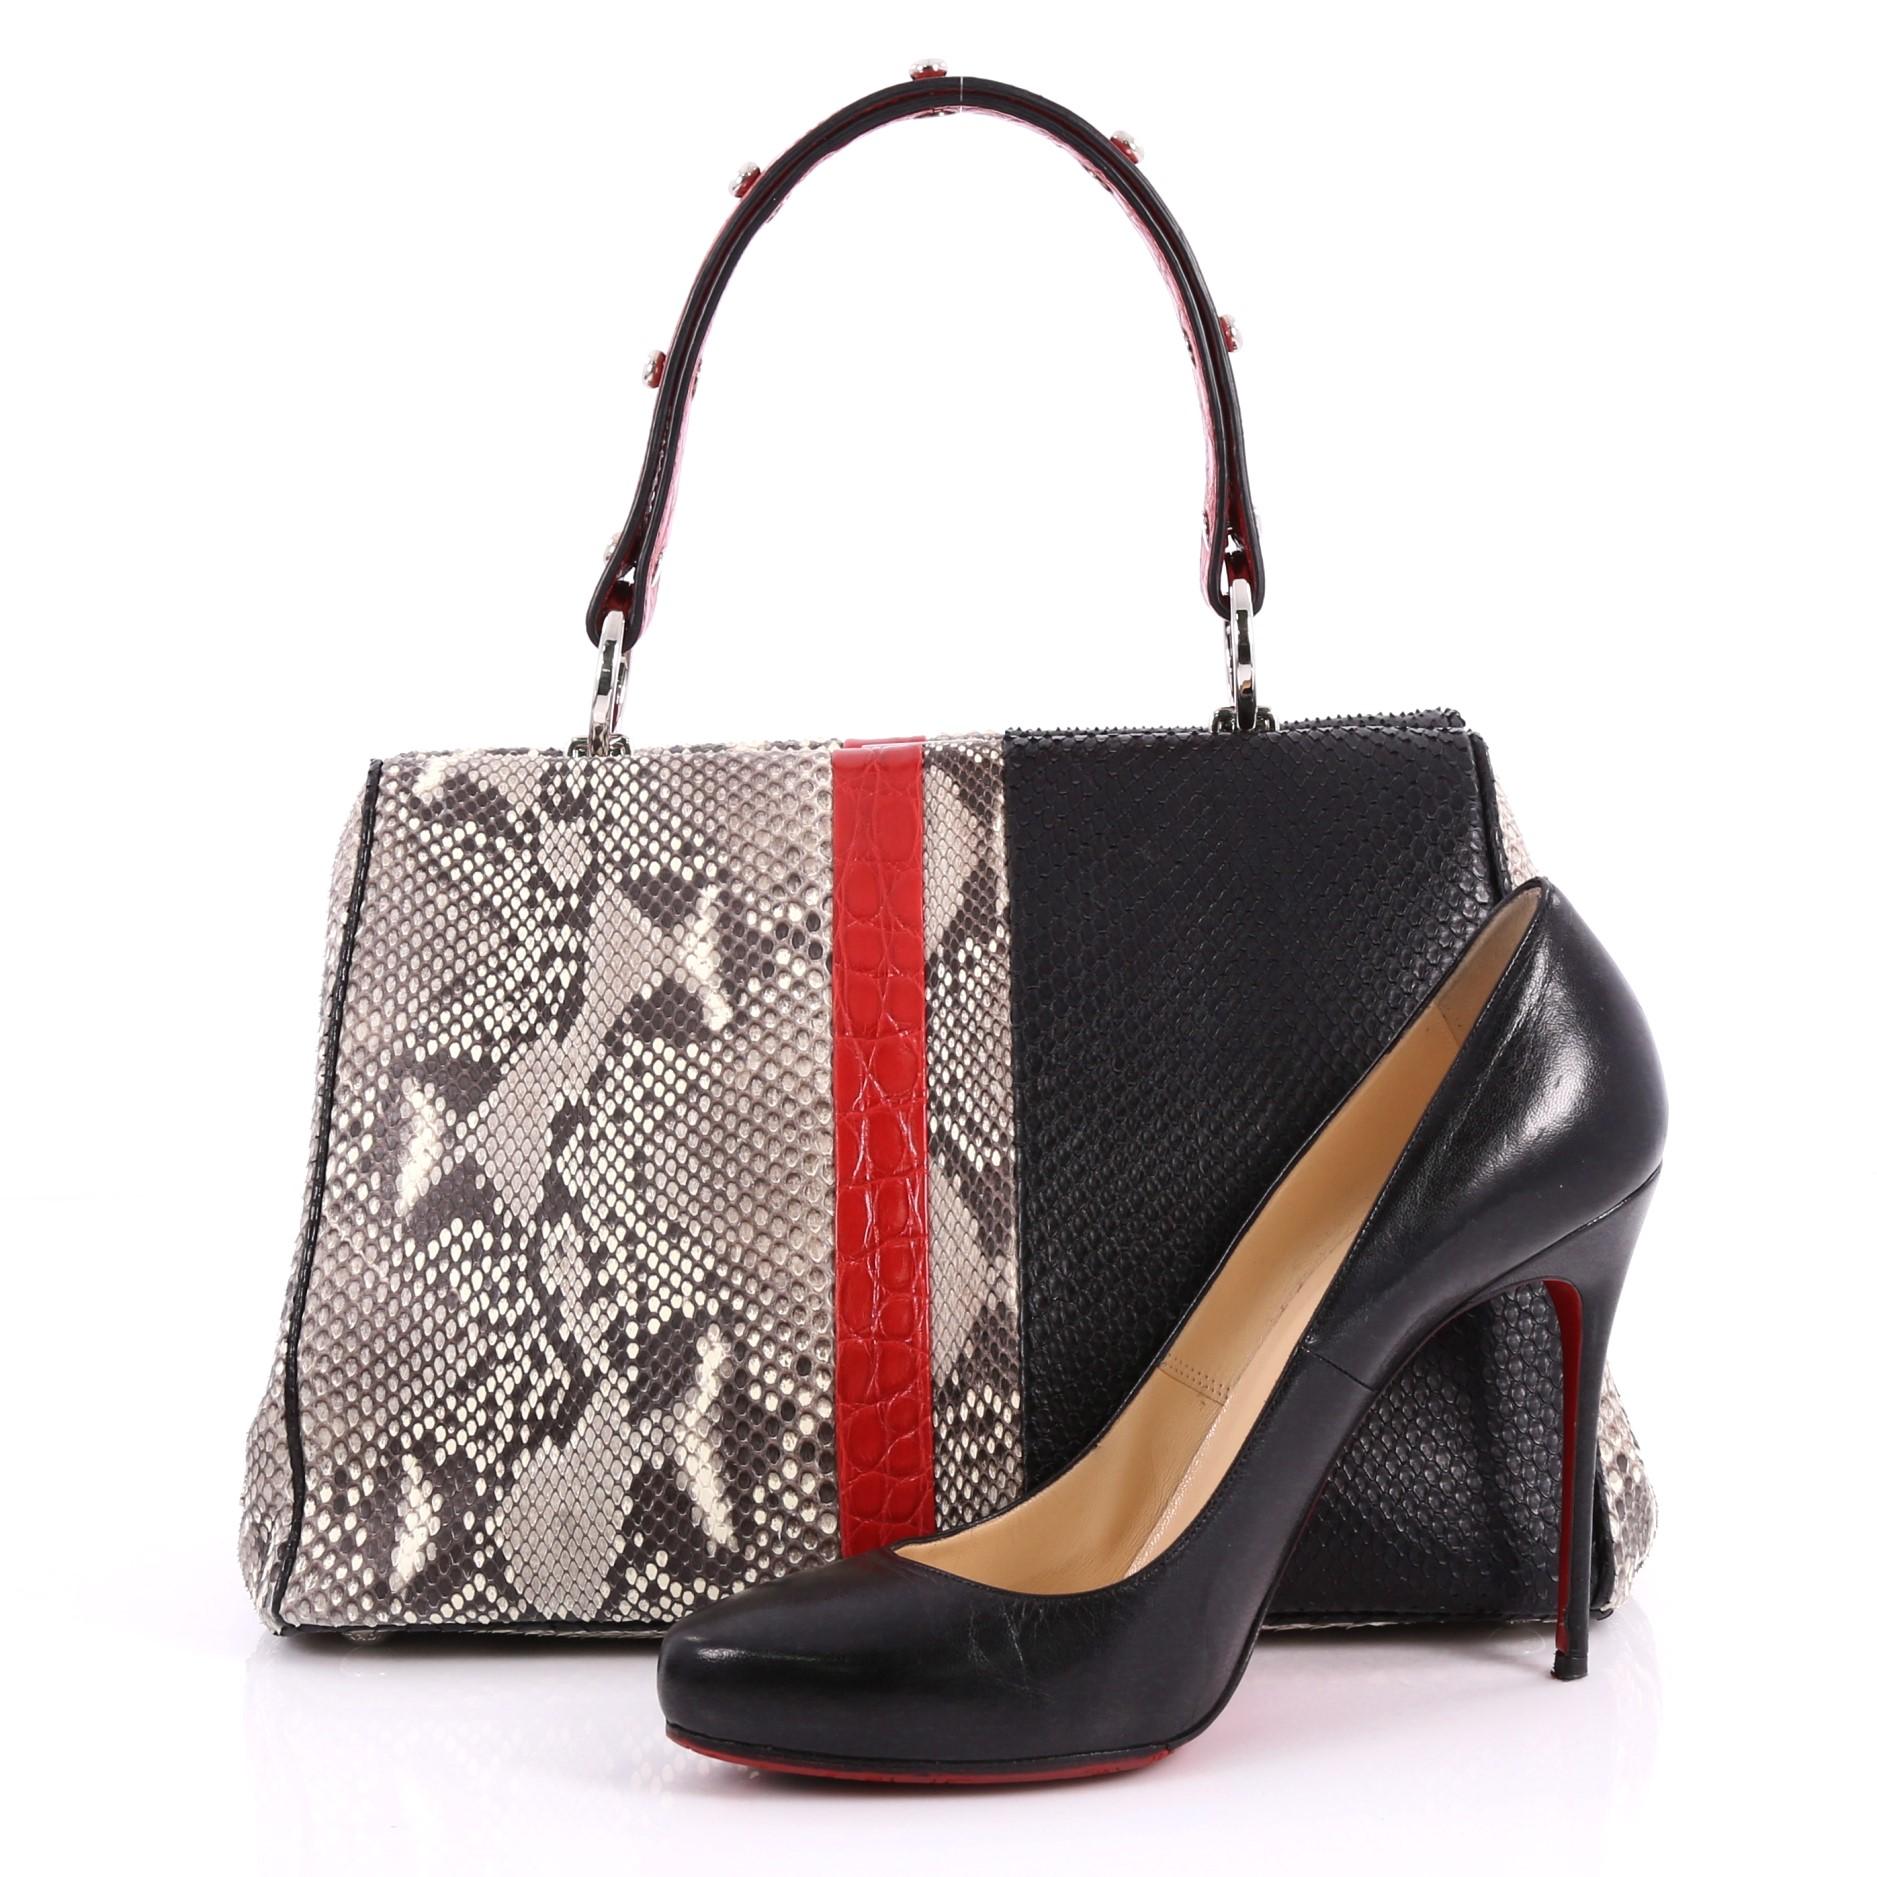 This Prada Baiadera Frame Bag Calfskin Small is a structured, vividly hued satchel perfect for the modern fashionista. Crafted from genuine gray and black python skin with red crocodile skin, this chic bag features studded top handle, frame top,